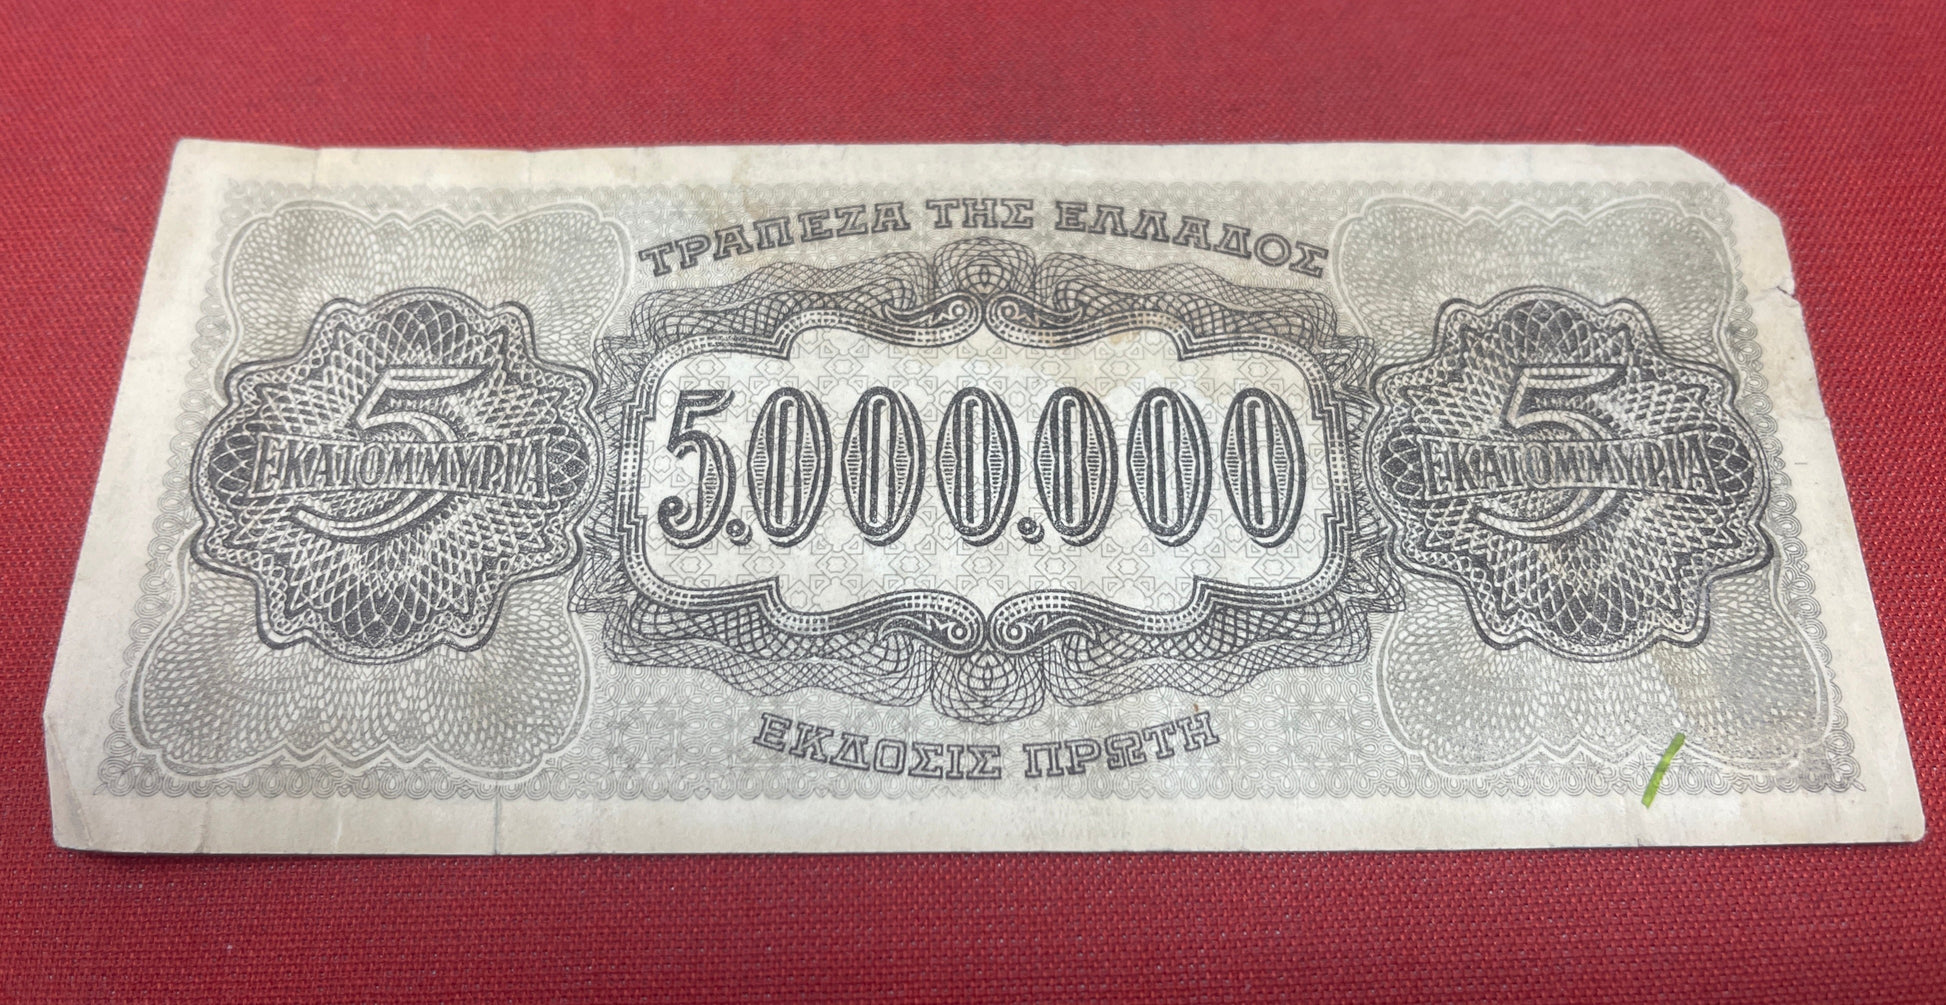  Bank of Greece. Axis occupation 5.000.000 Drachmai Banknote Serial -IT943761